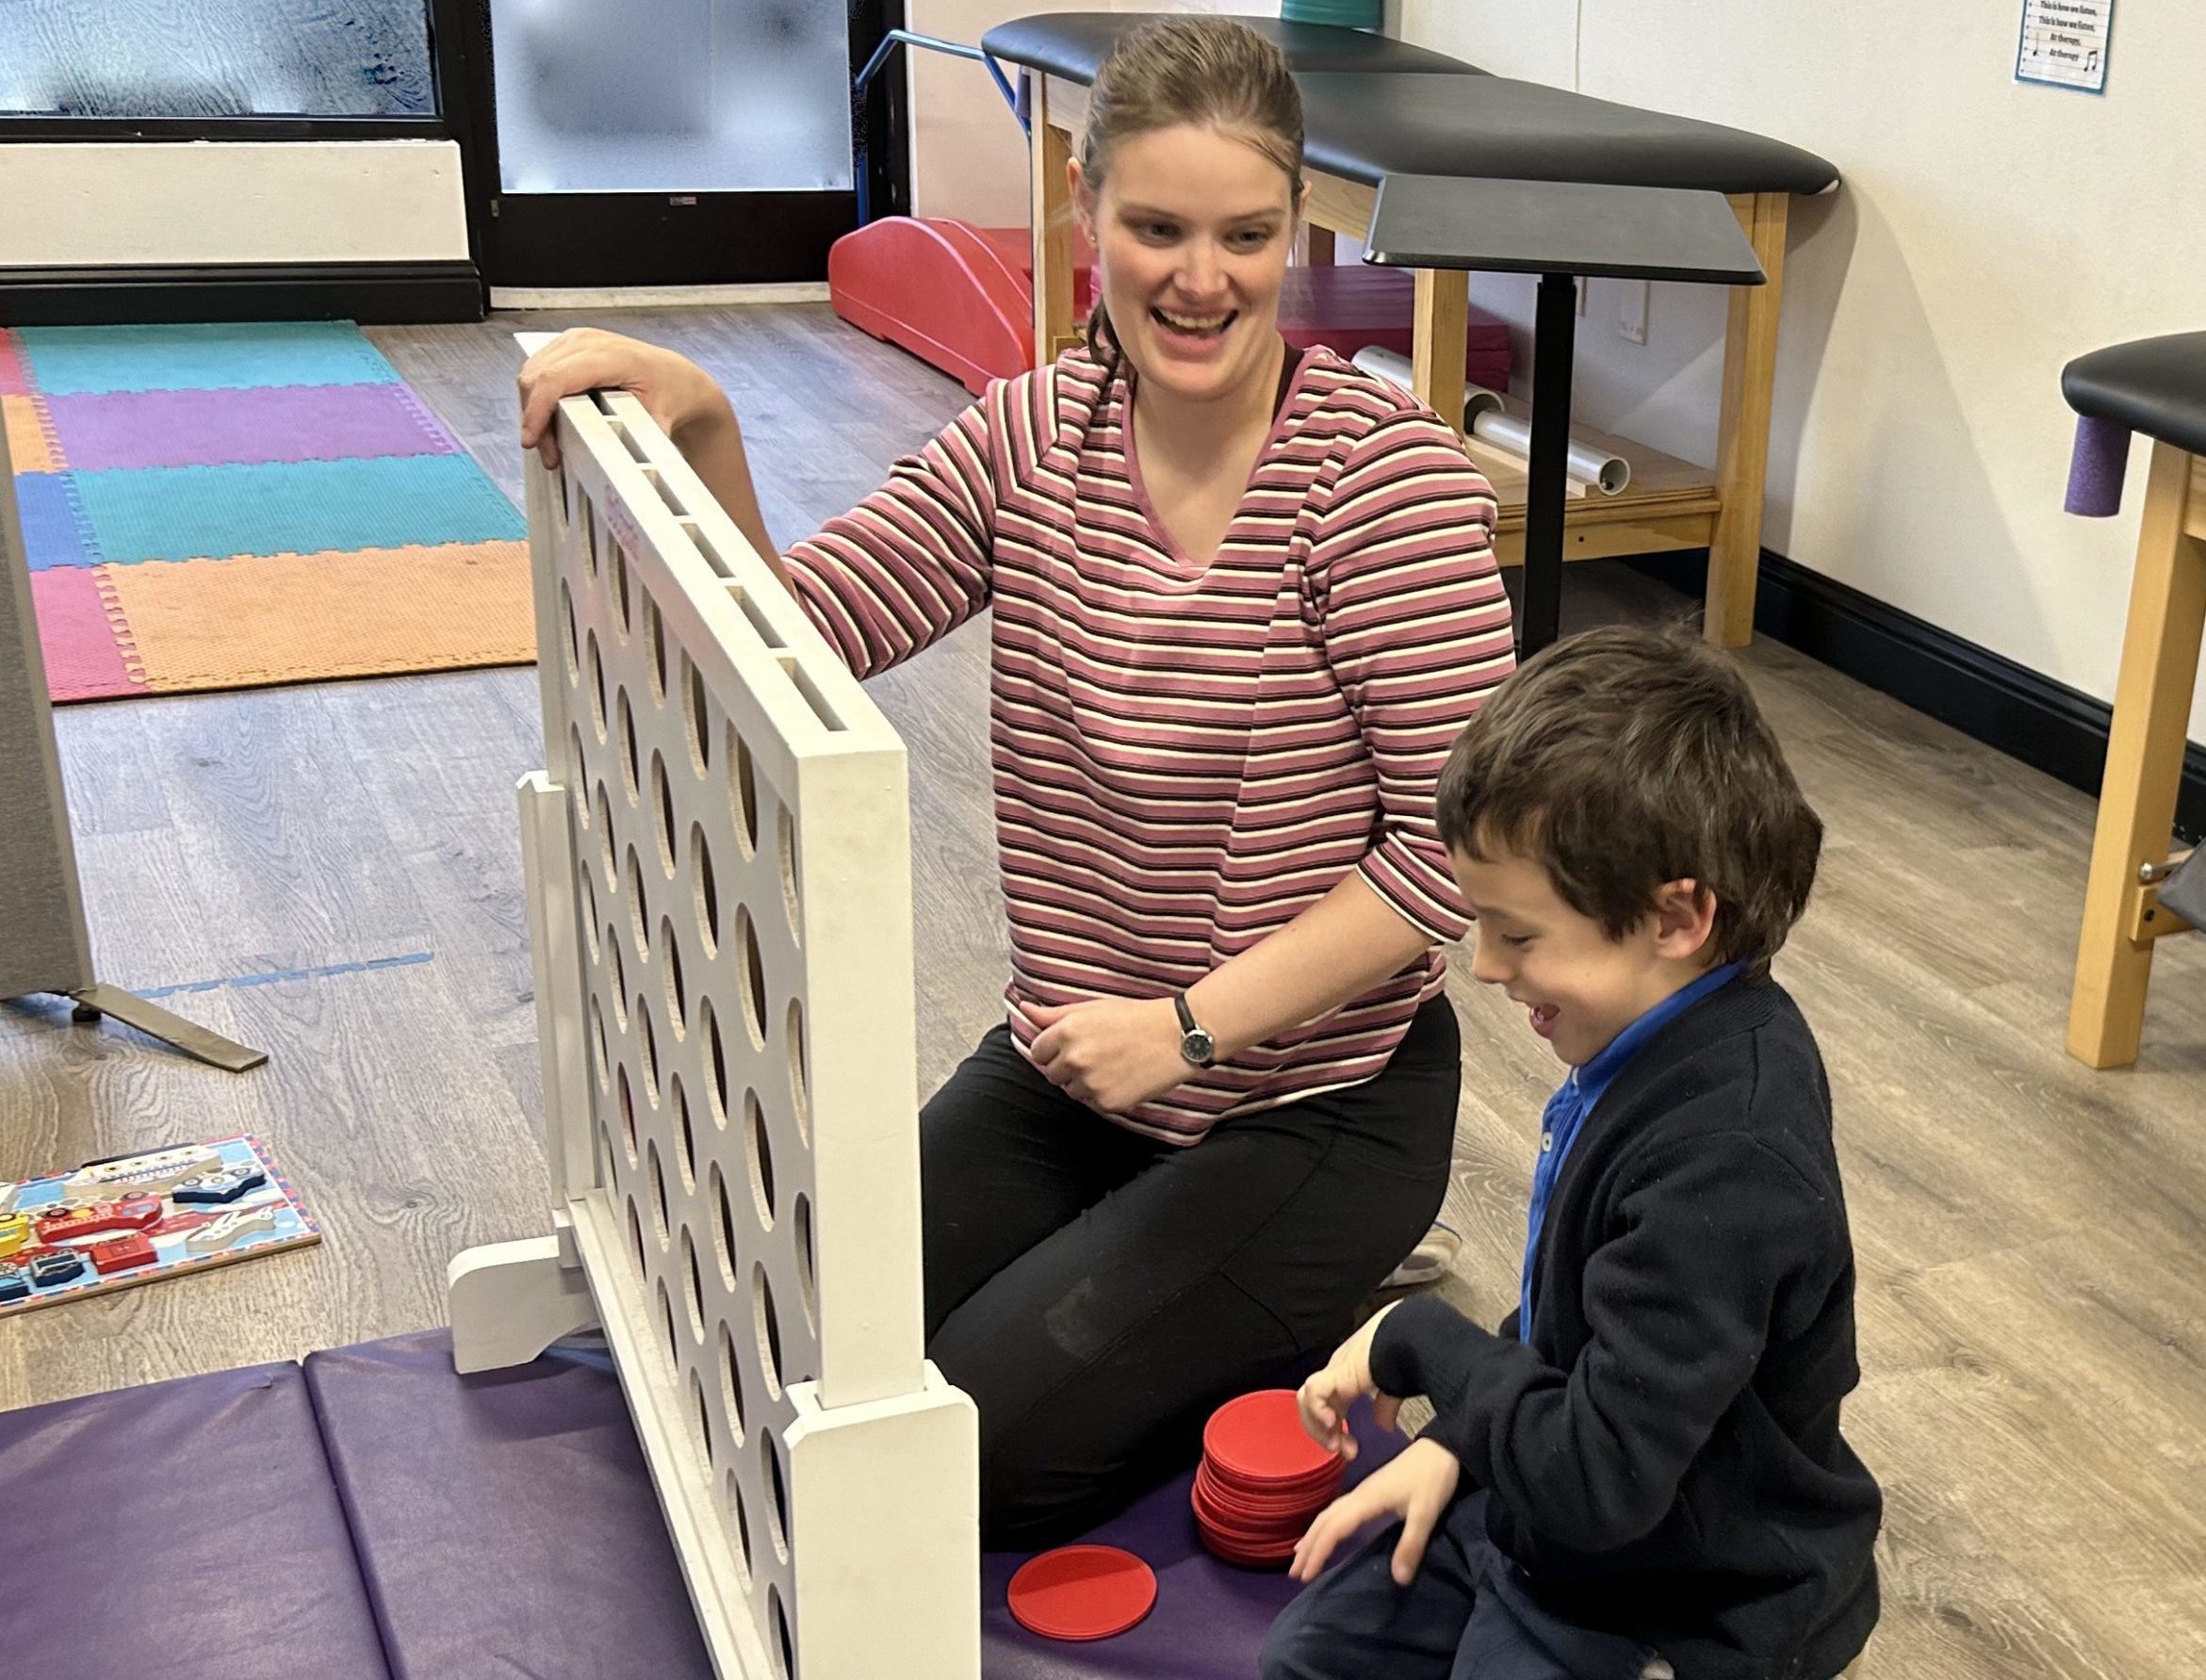 Child and therapist playing connect four